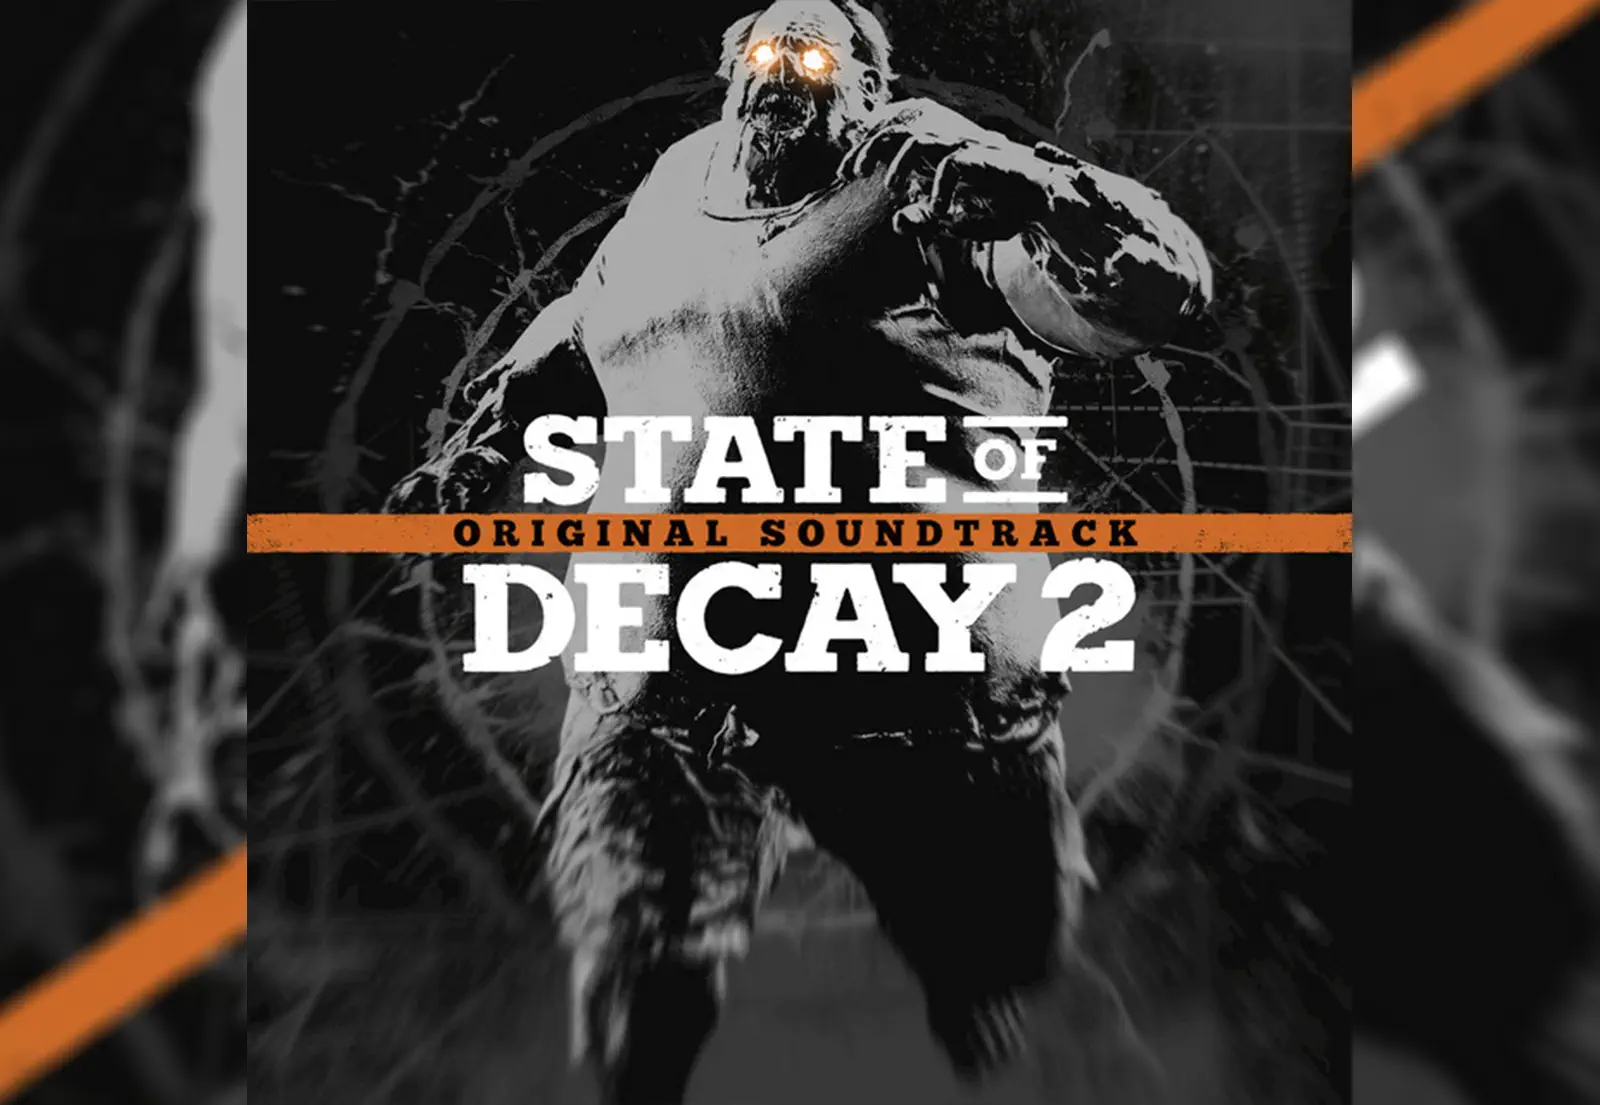 State of Decay 2 - Original Soundtrack